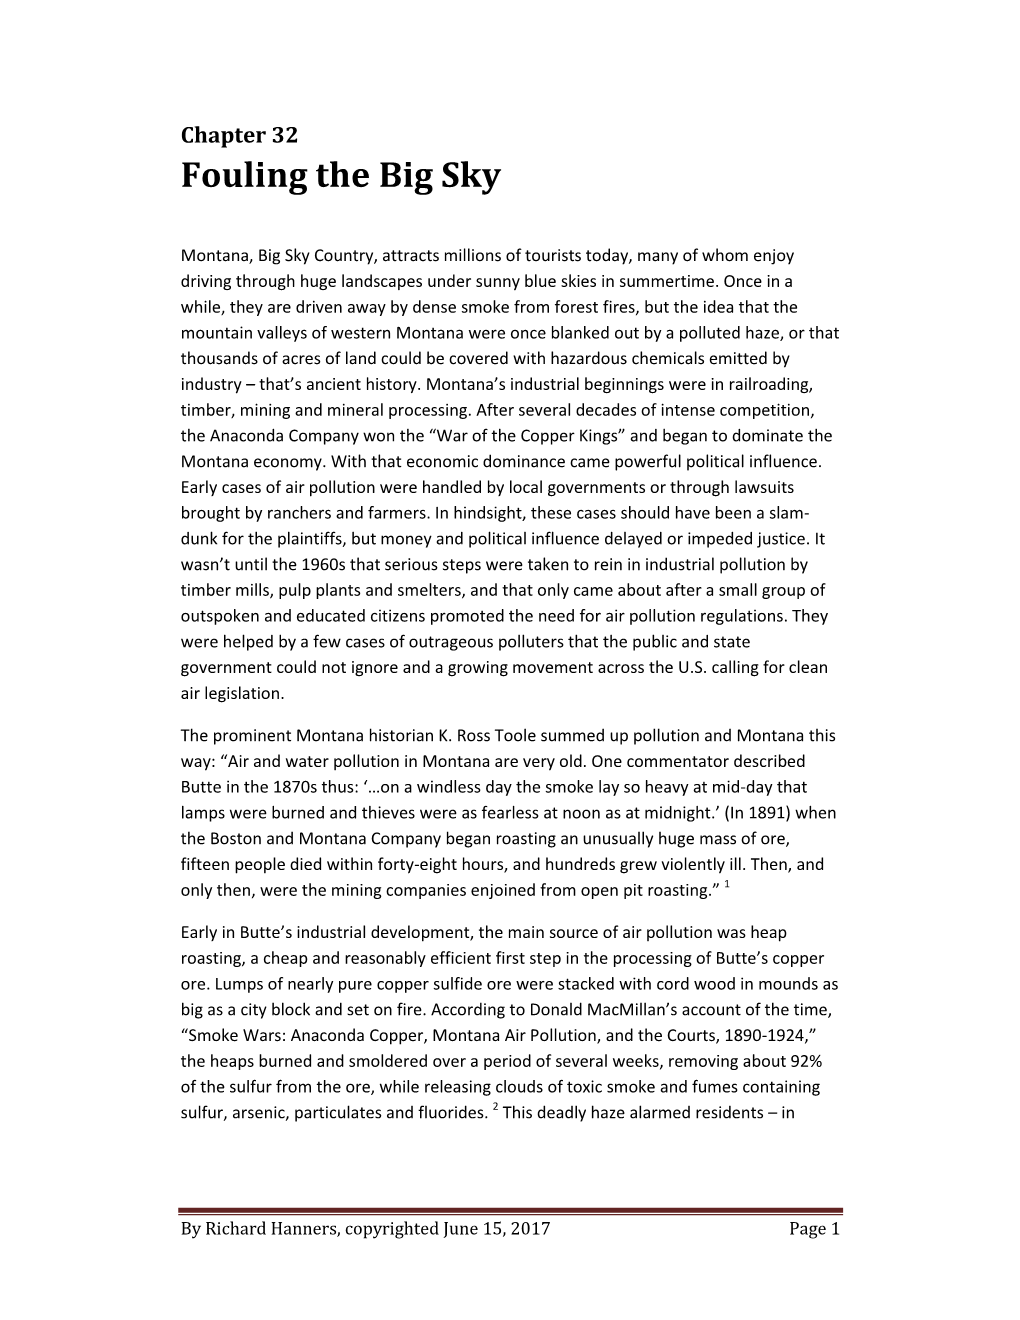 Fouling the Big Sky